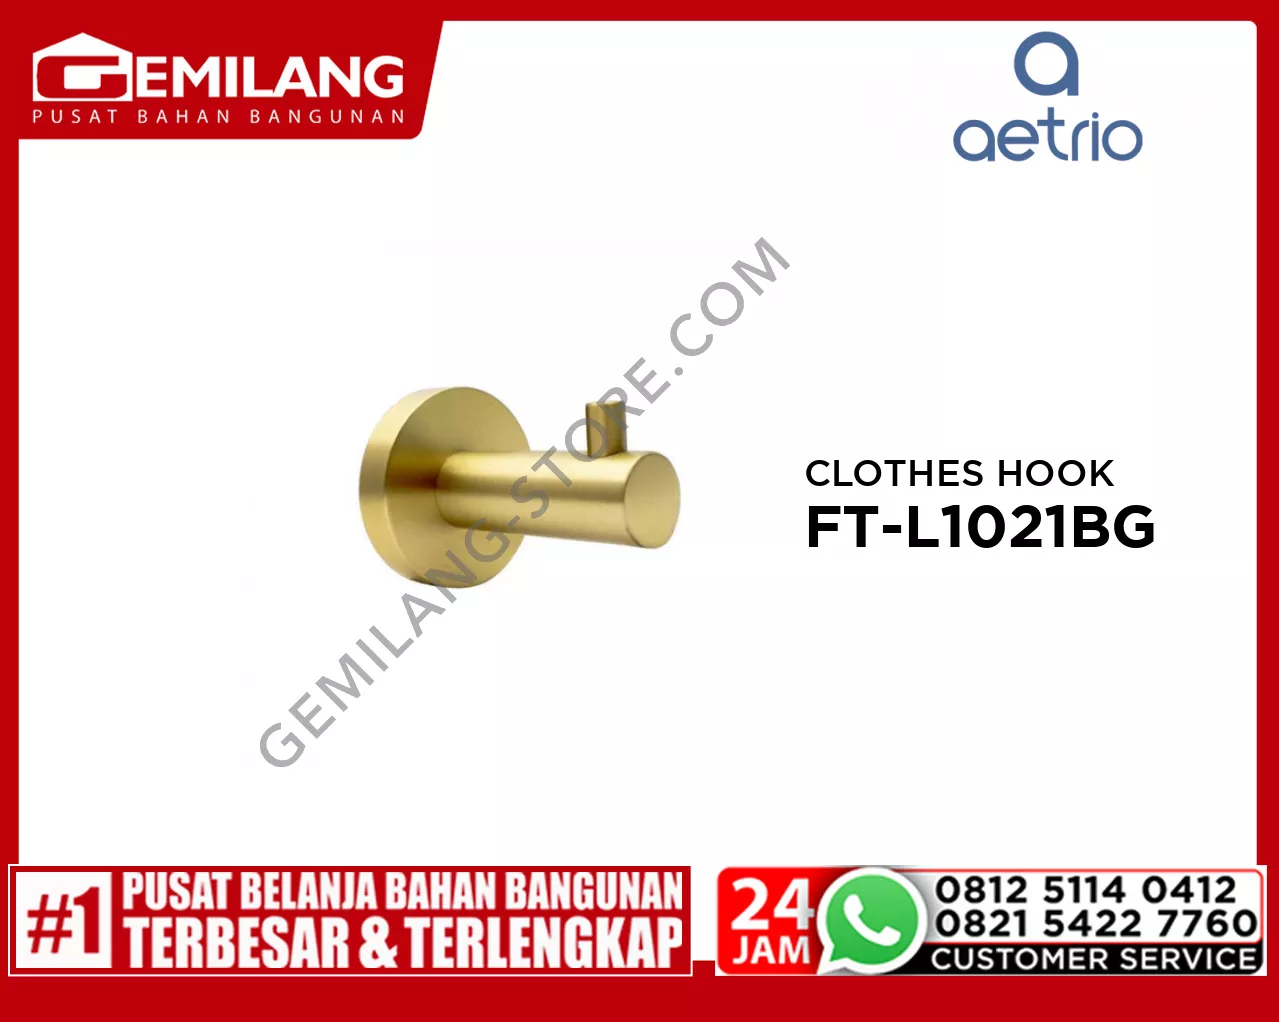 AETRIO CLOTHES HOOK BRUSHED GOLD FT-L1021BG